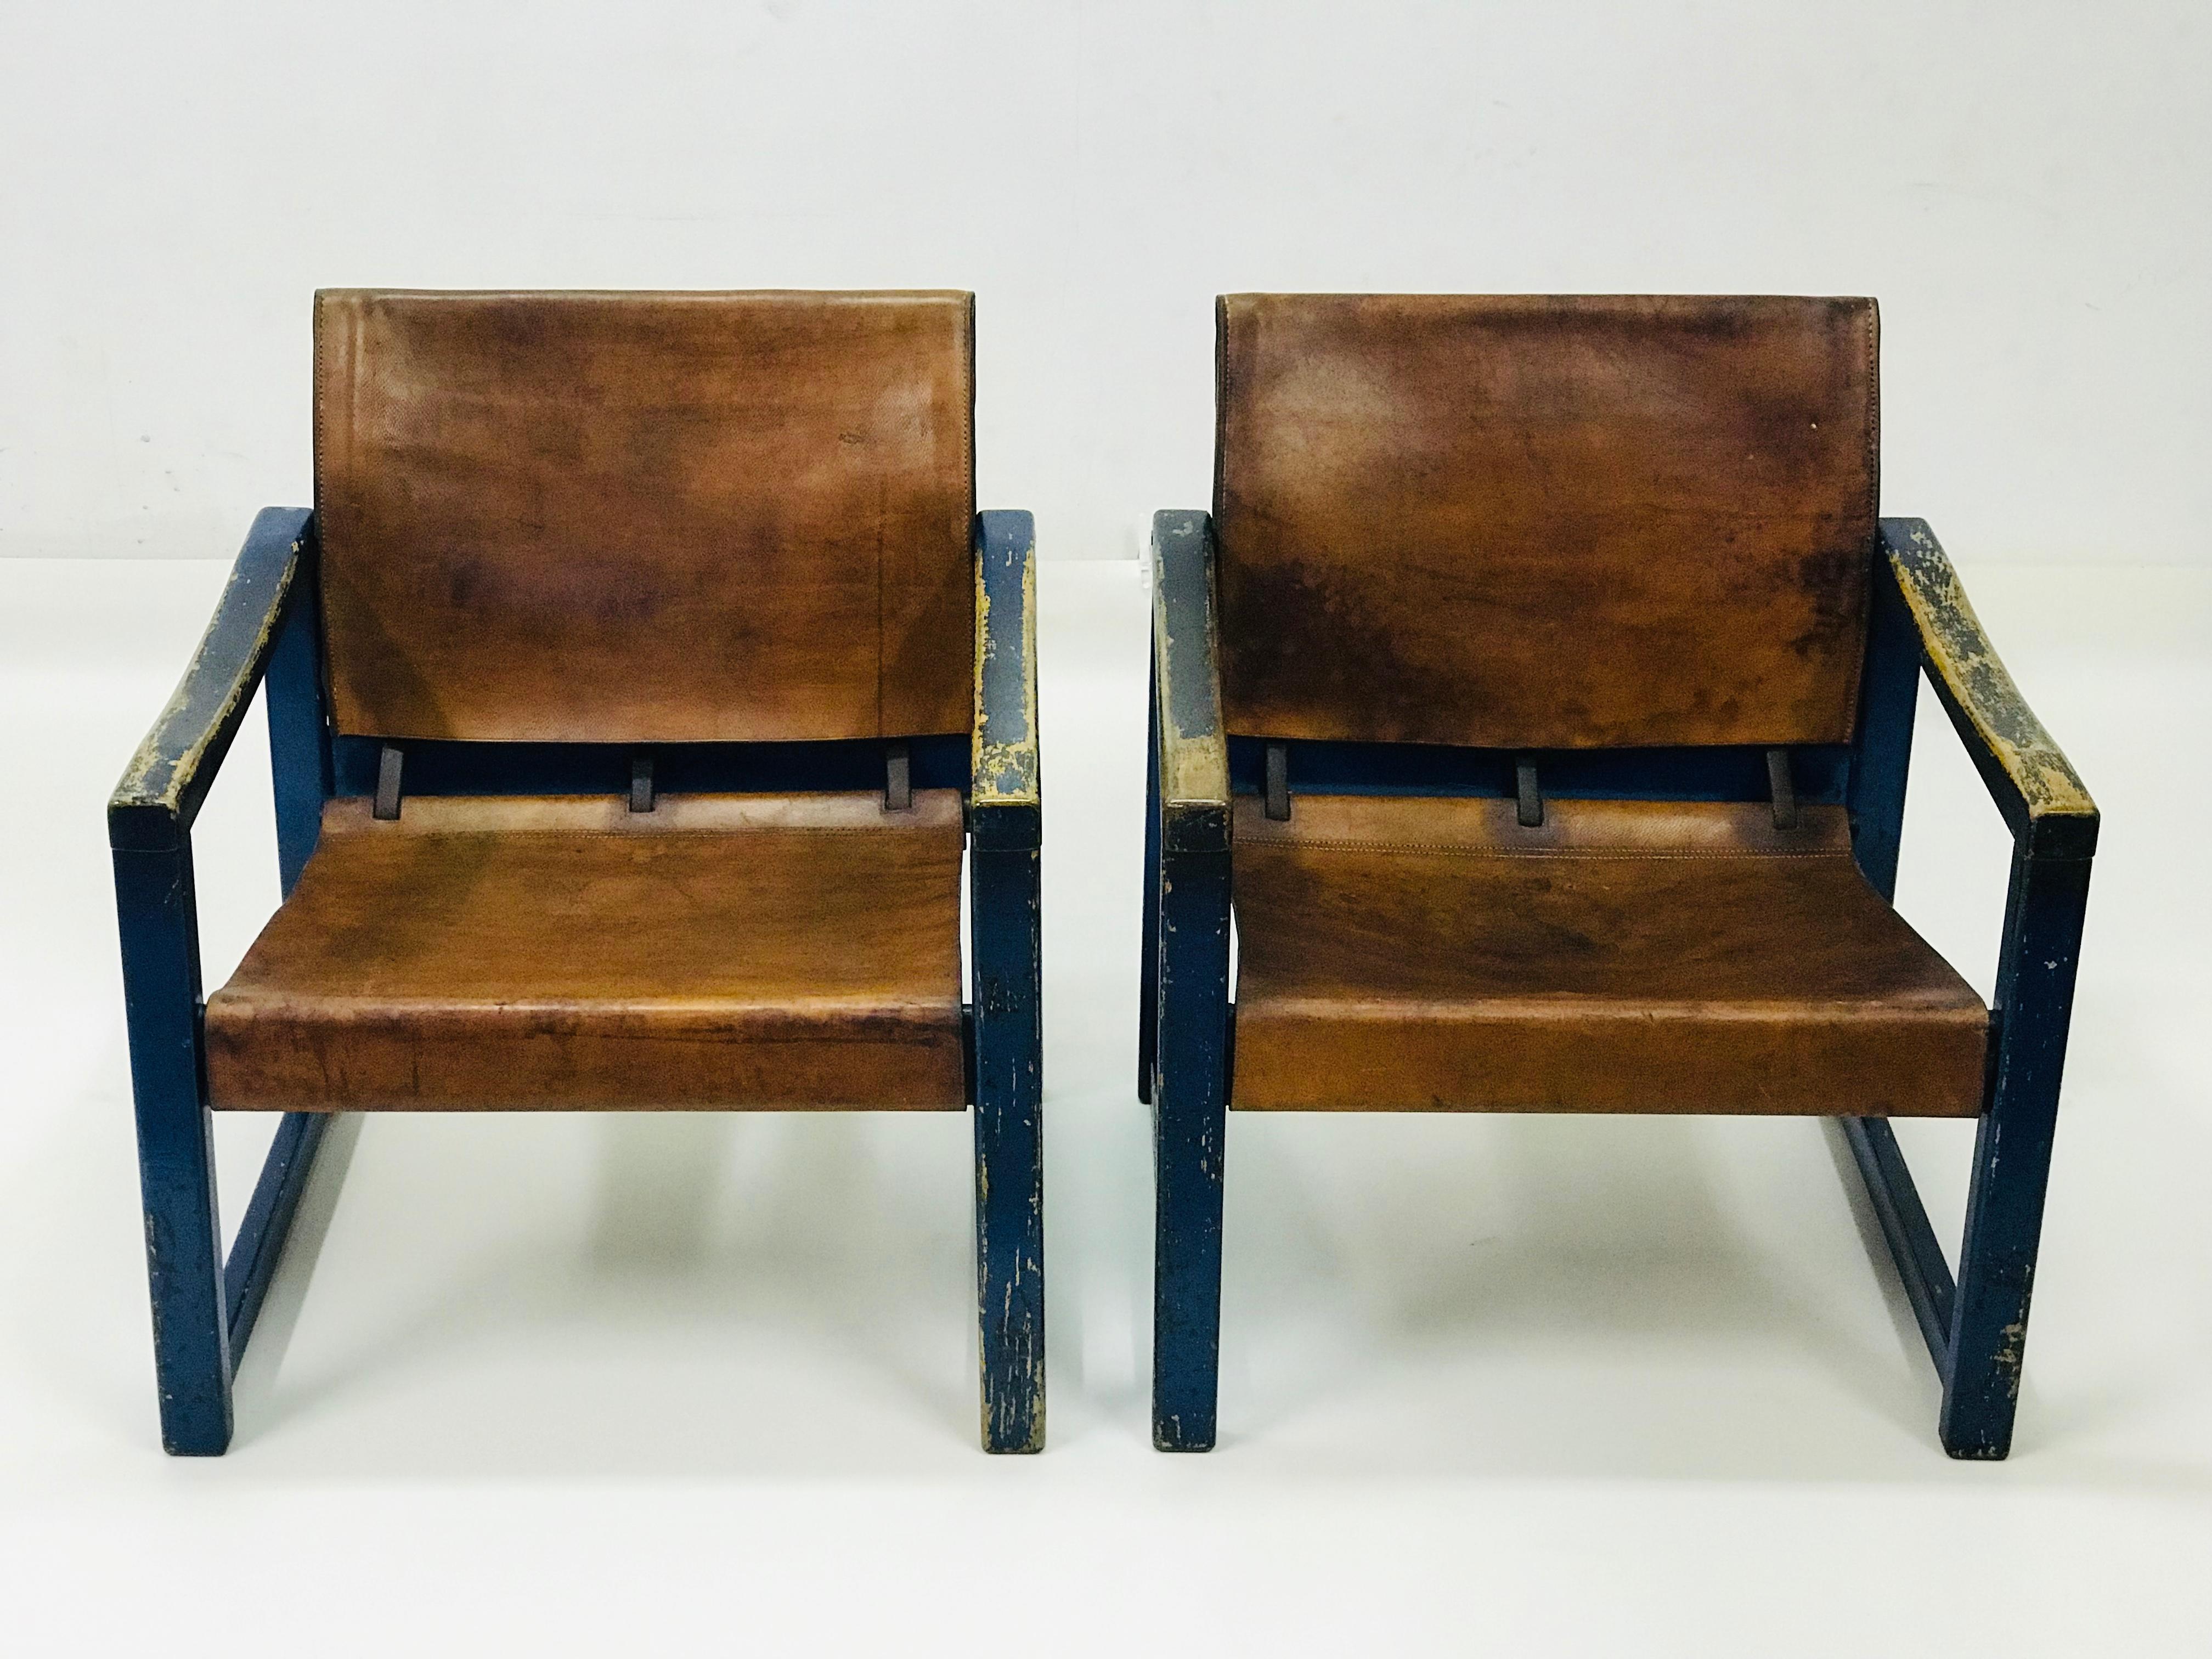 The chairs is designed by Karin Mobring and it was made in the year 1970. The chairs have got a stabile frame and the sitting part is made of the massive leather. These ones are preserved condition, useful, slightly wood cuts and the patina leather.